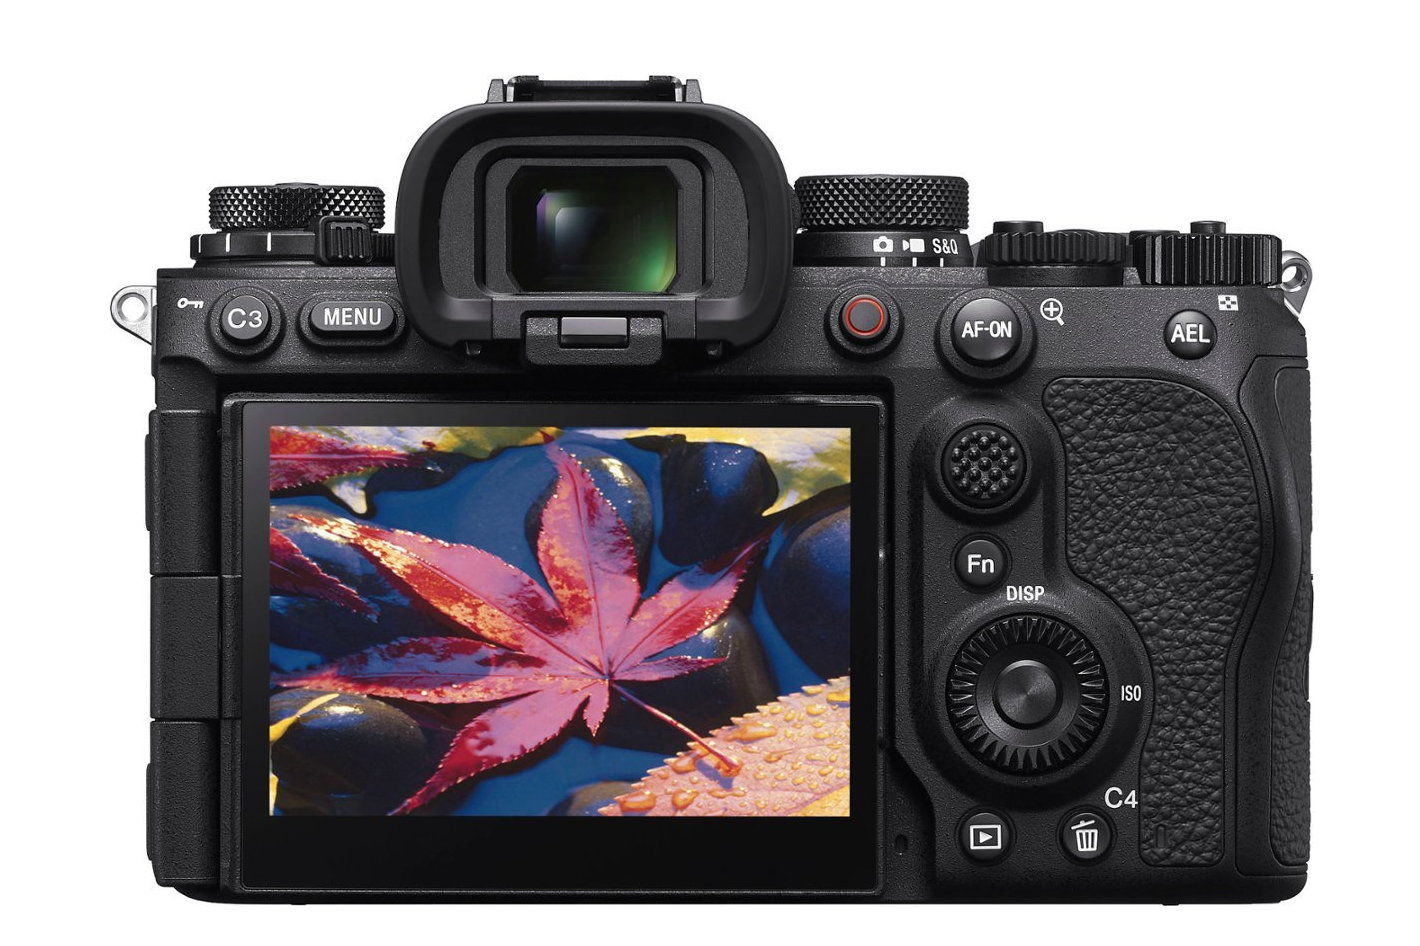 Sony cameras to offer birth certificate for images